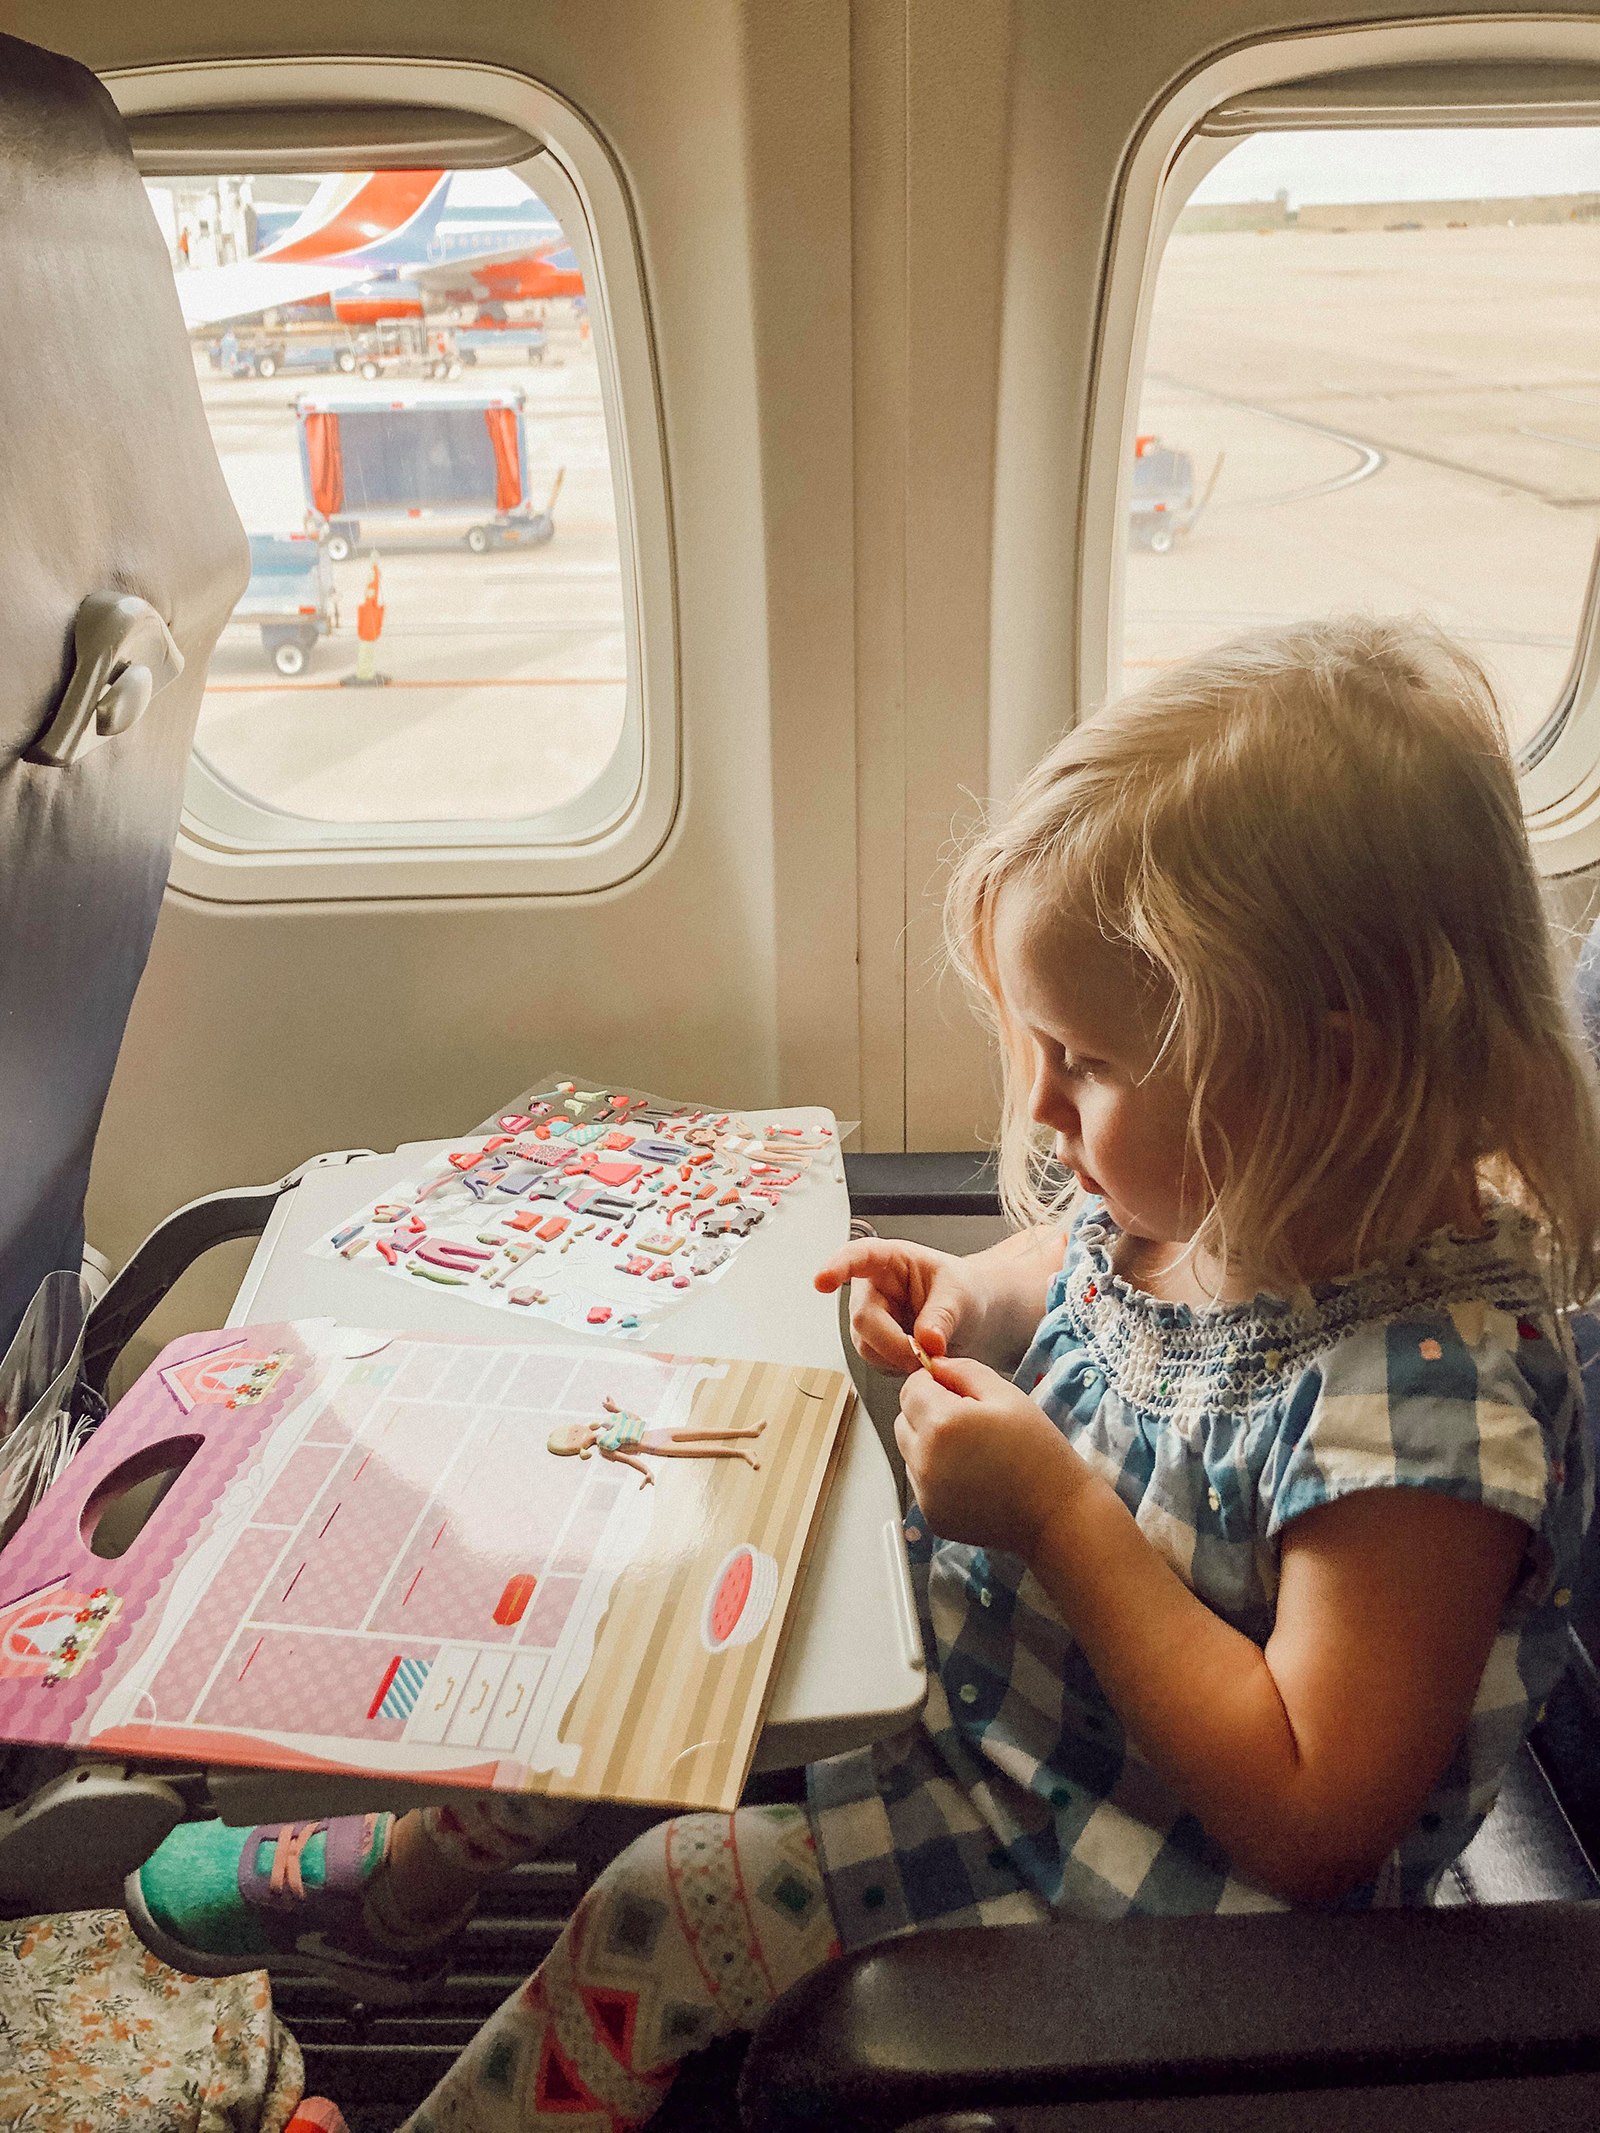 Airplane activities for kids Travel toys for children Kids travel essentials Family travel gear Traveling with toddlers Airplane tray table accessories Kids backpacks for travel Snacks for kids on planes